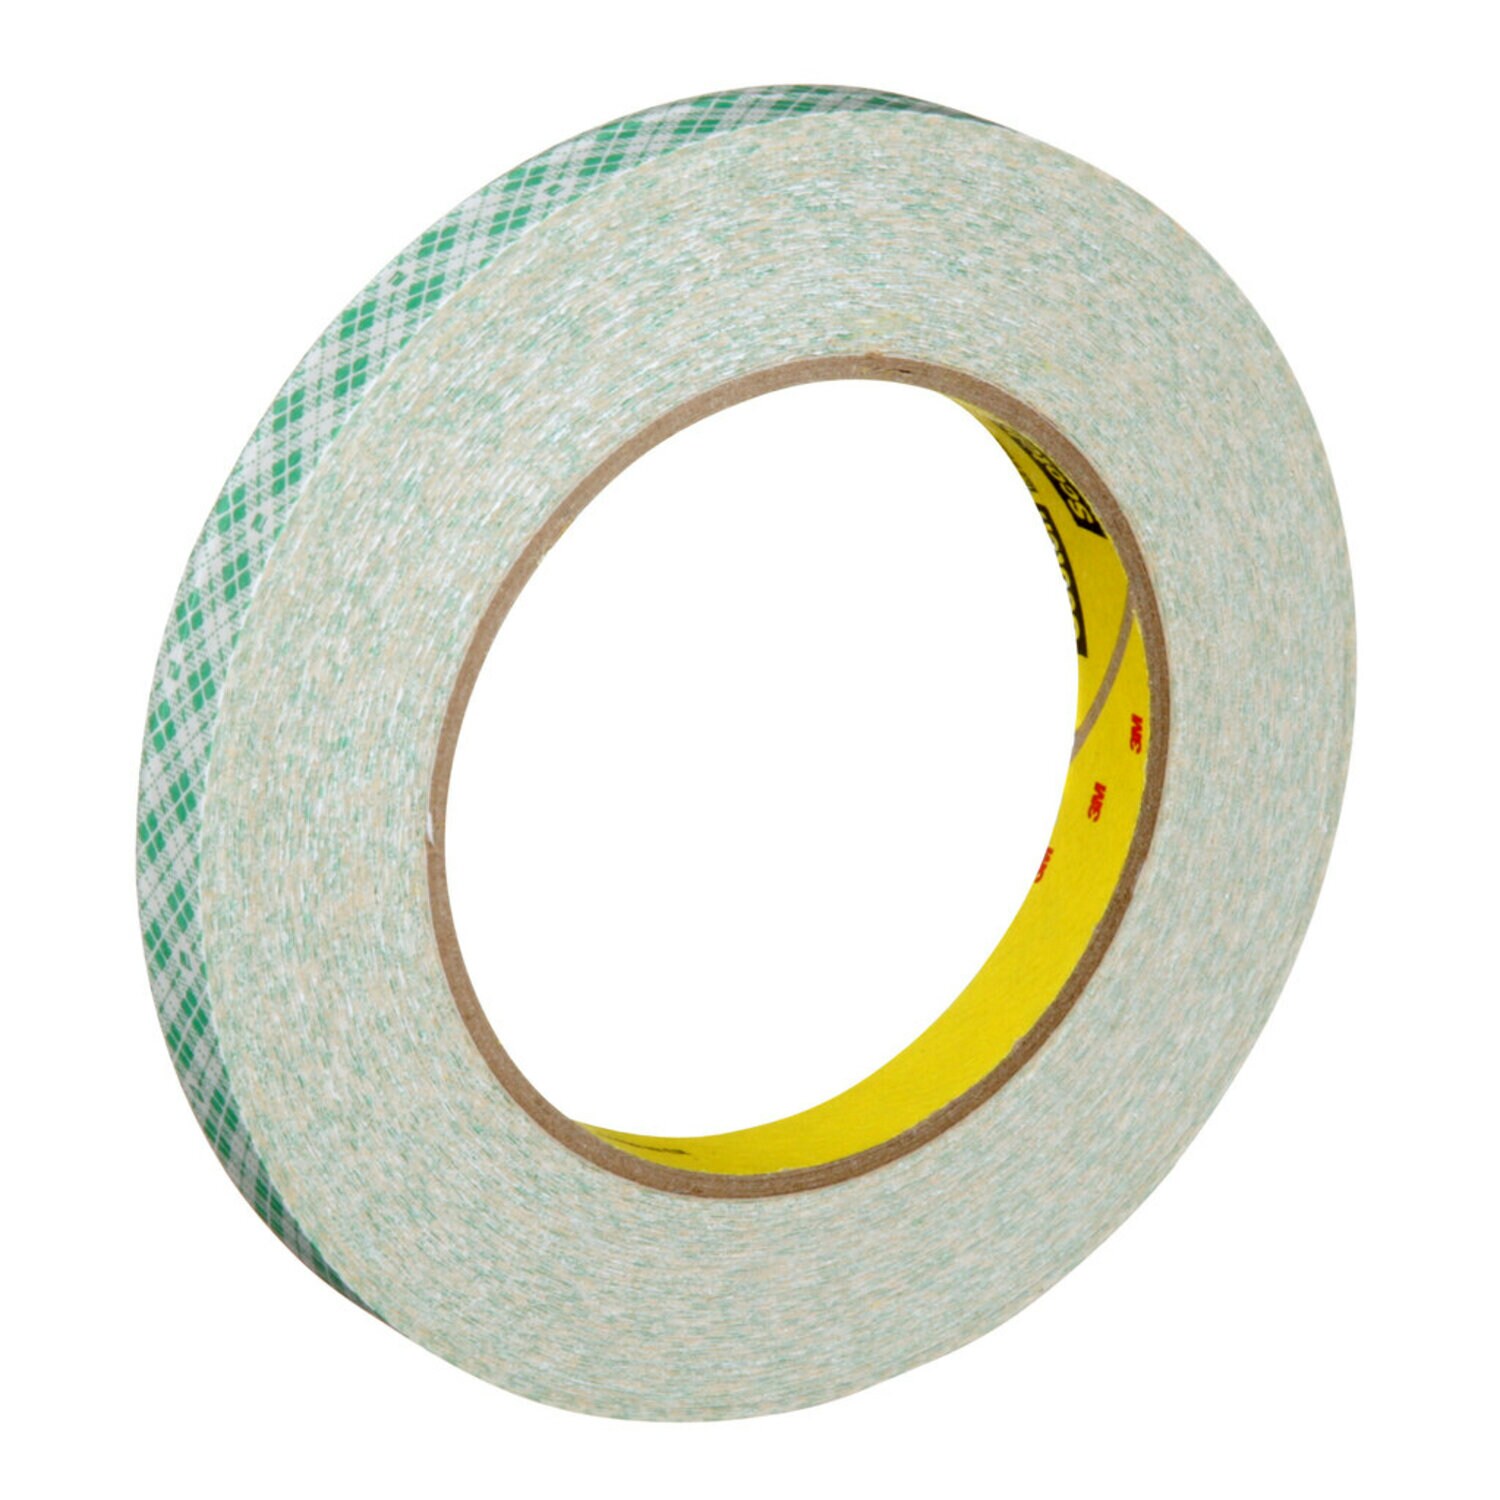 7010300419 - 3M Double Coated Paper Tape 410M, Natural, 1/4 in x 36 yd, 5 mil, 144
rolls per case